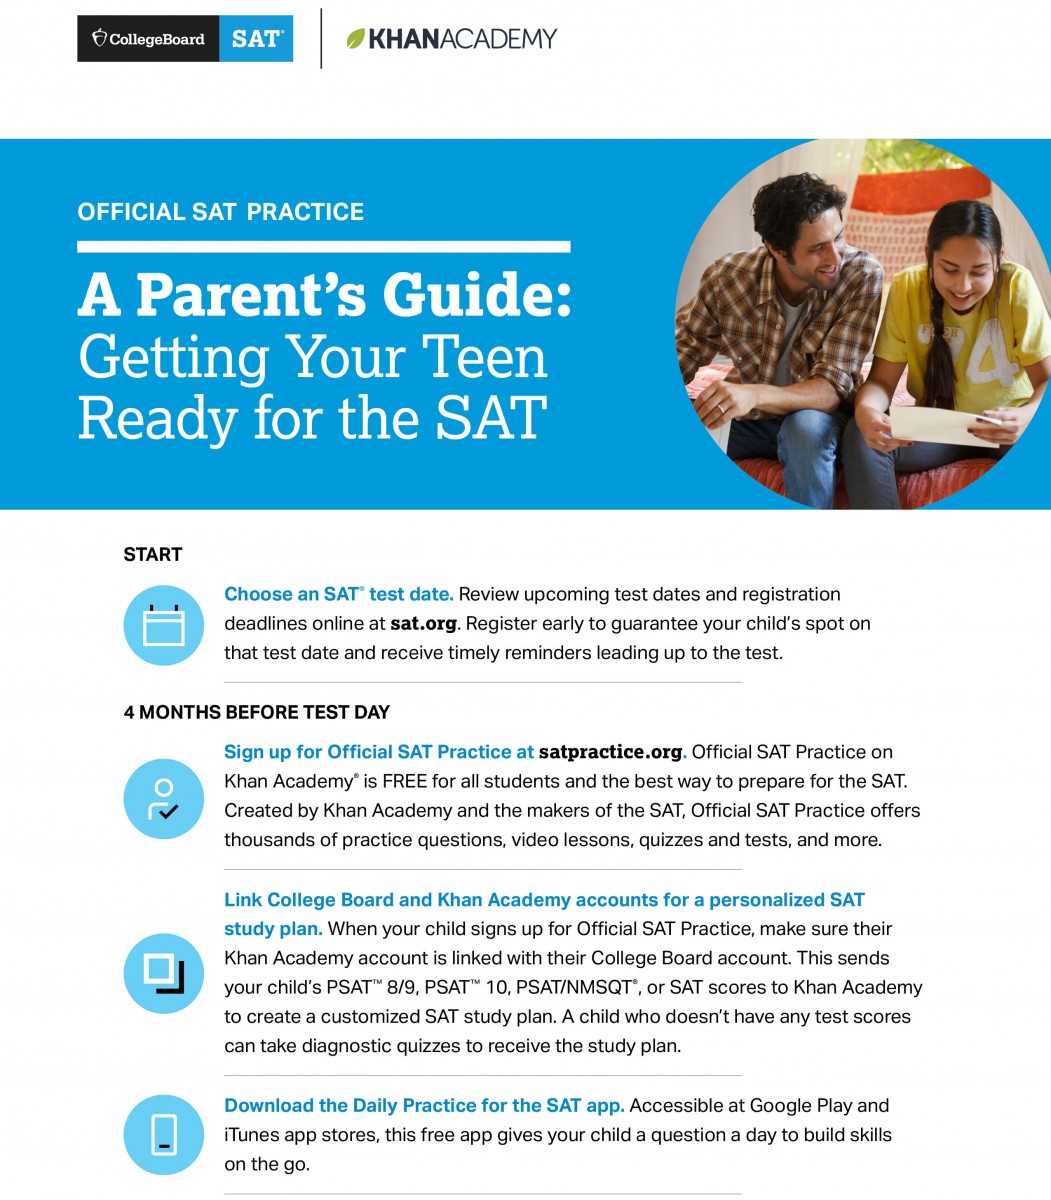 Prepare Your Teen for the SAT - English